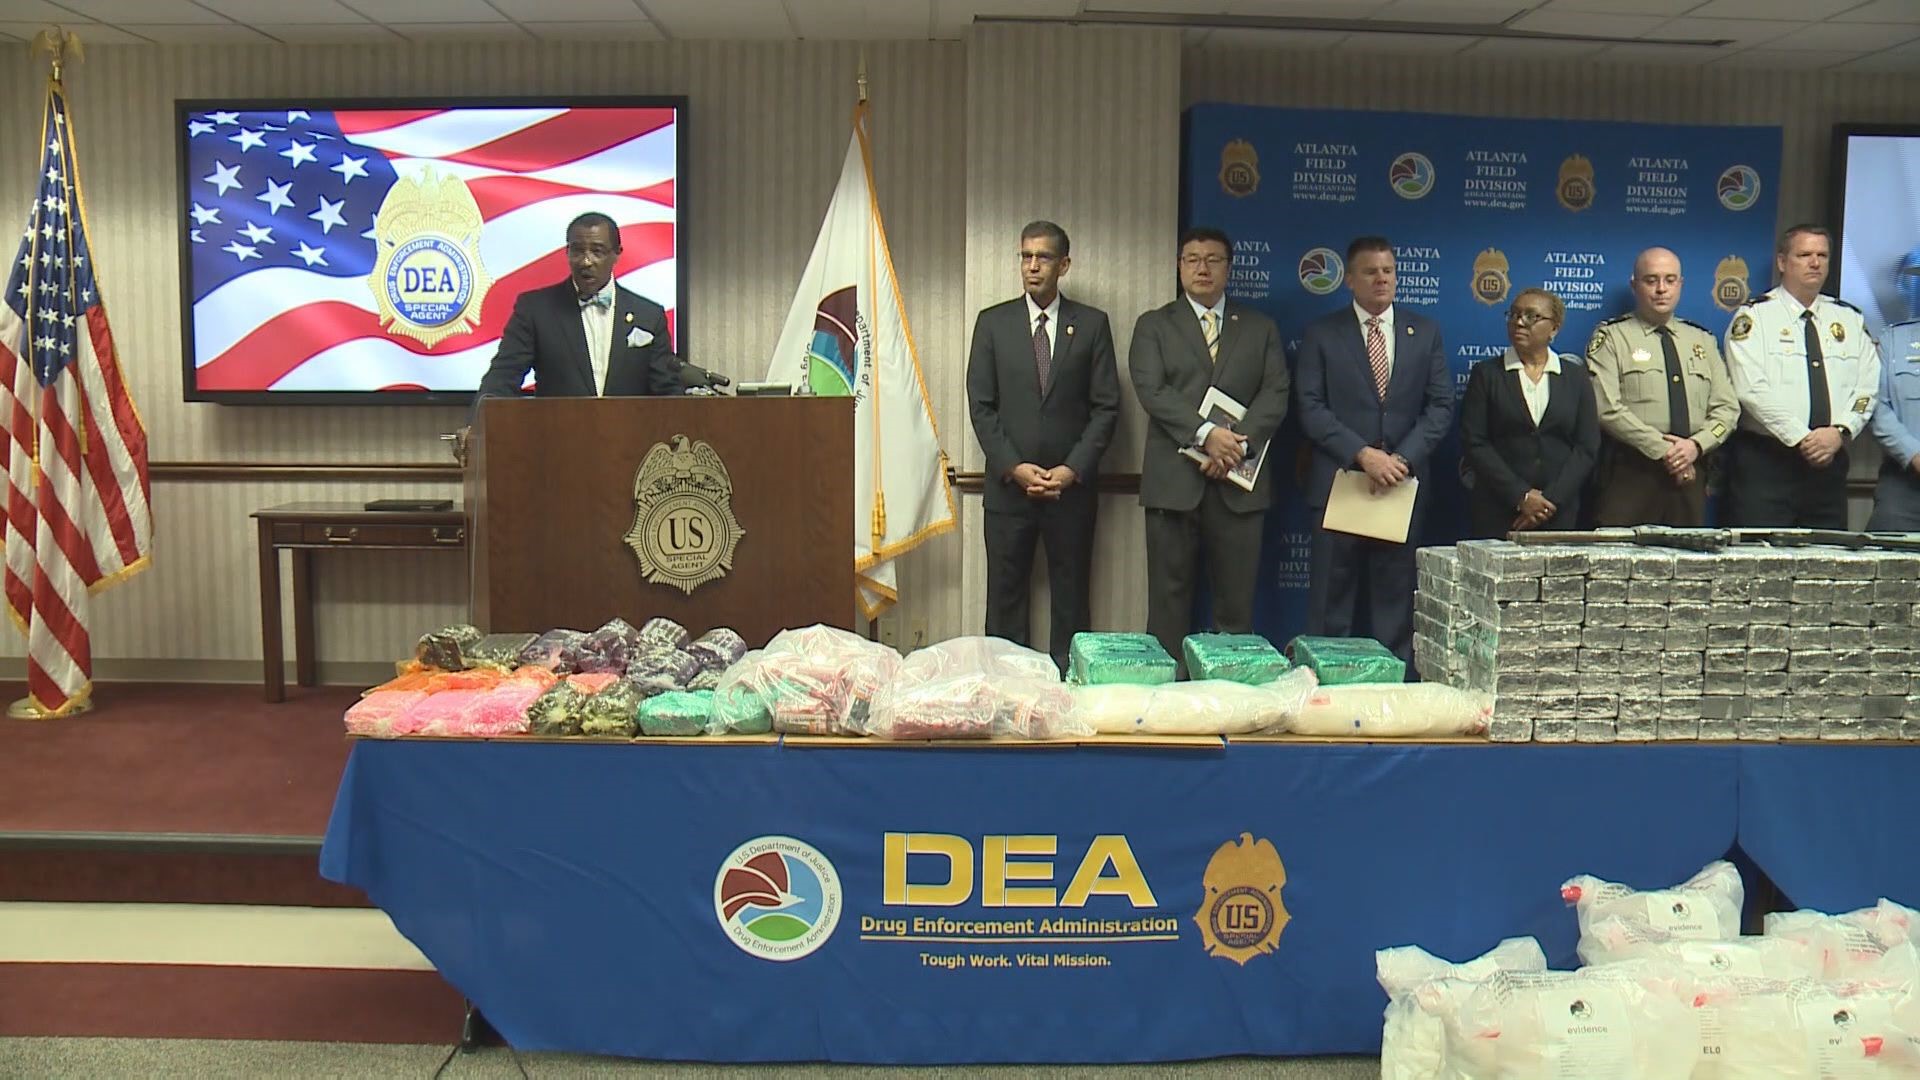 In all, agents said they seized enough meth for an estimated 2.3 million individual 12-hour doses of the drug - worth $2 to $4 million.